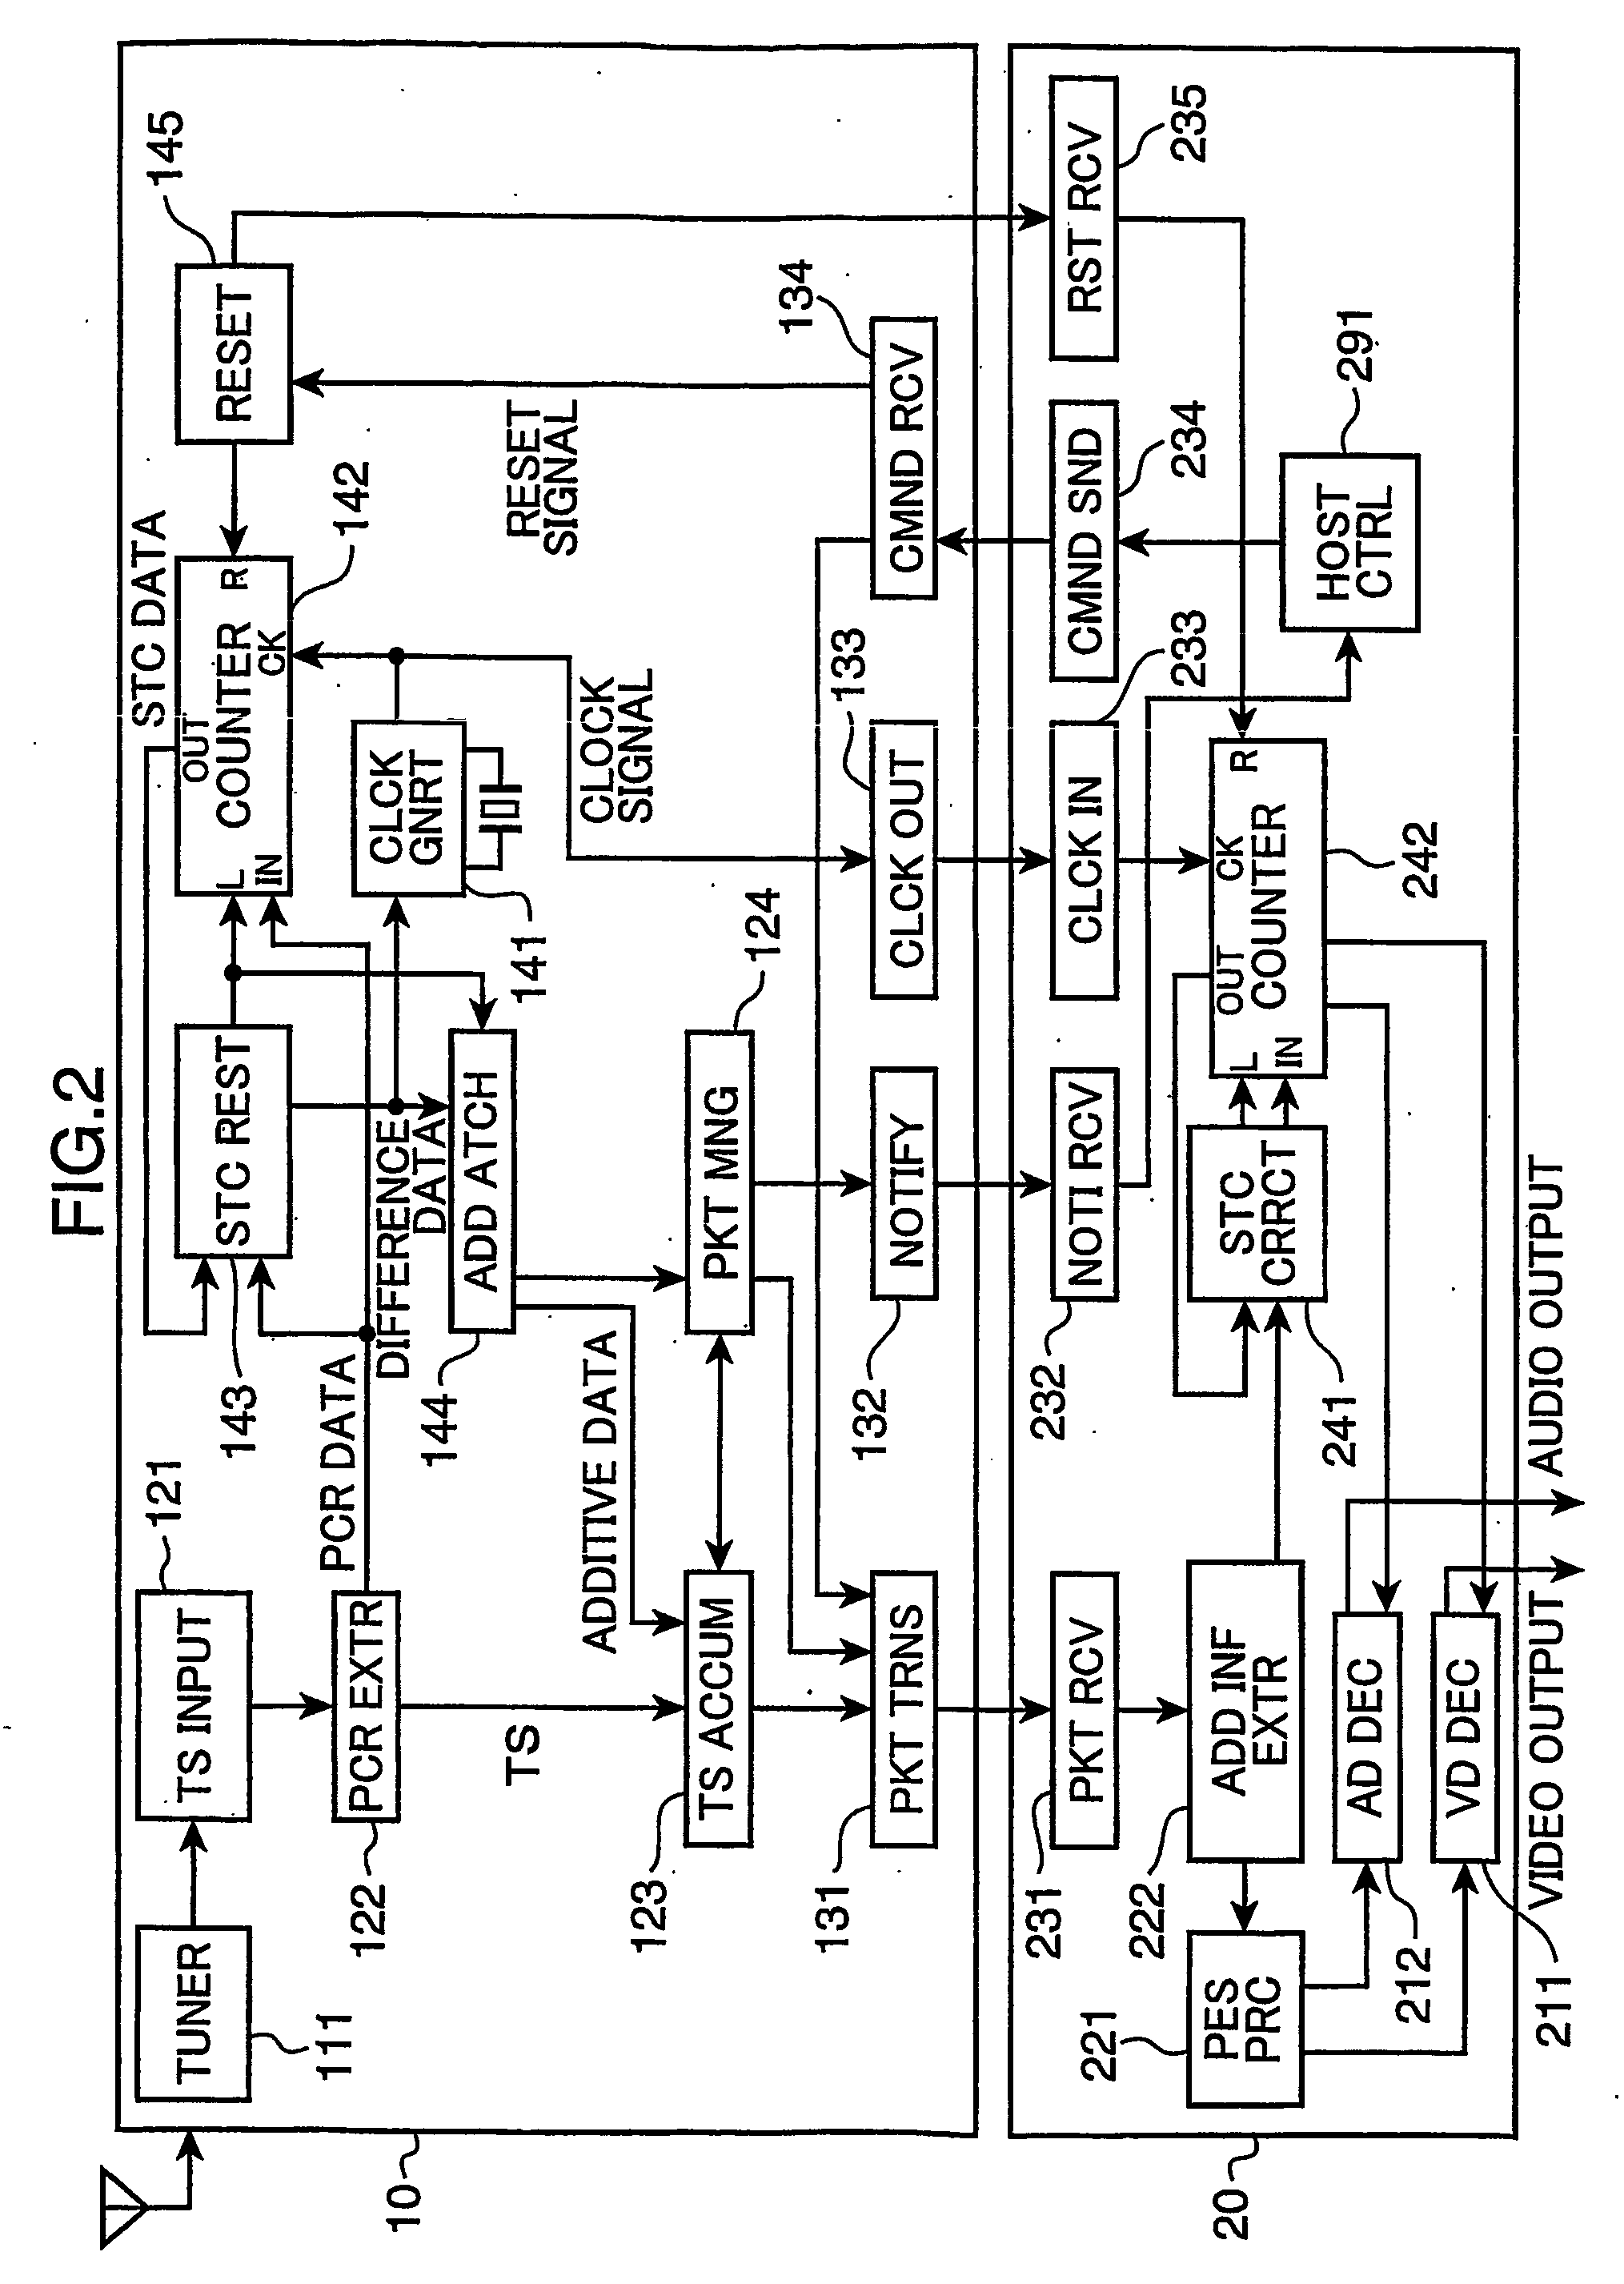 Synchronizing of a digital signal using a pcr program clock reference